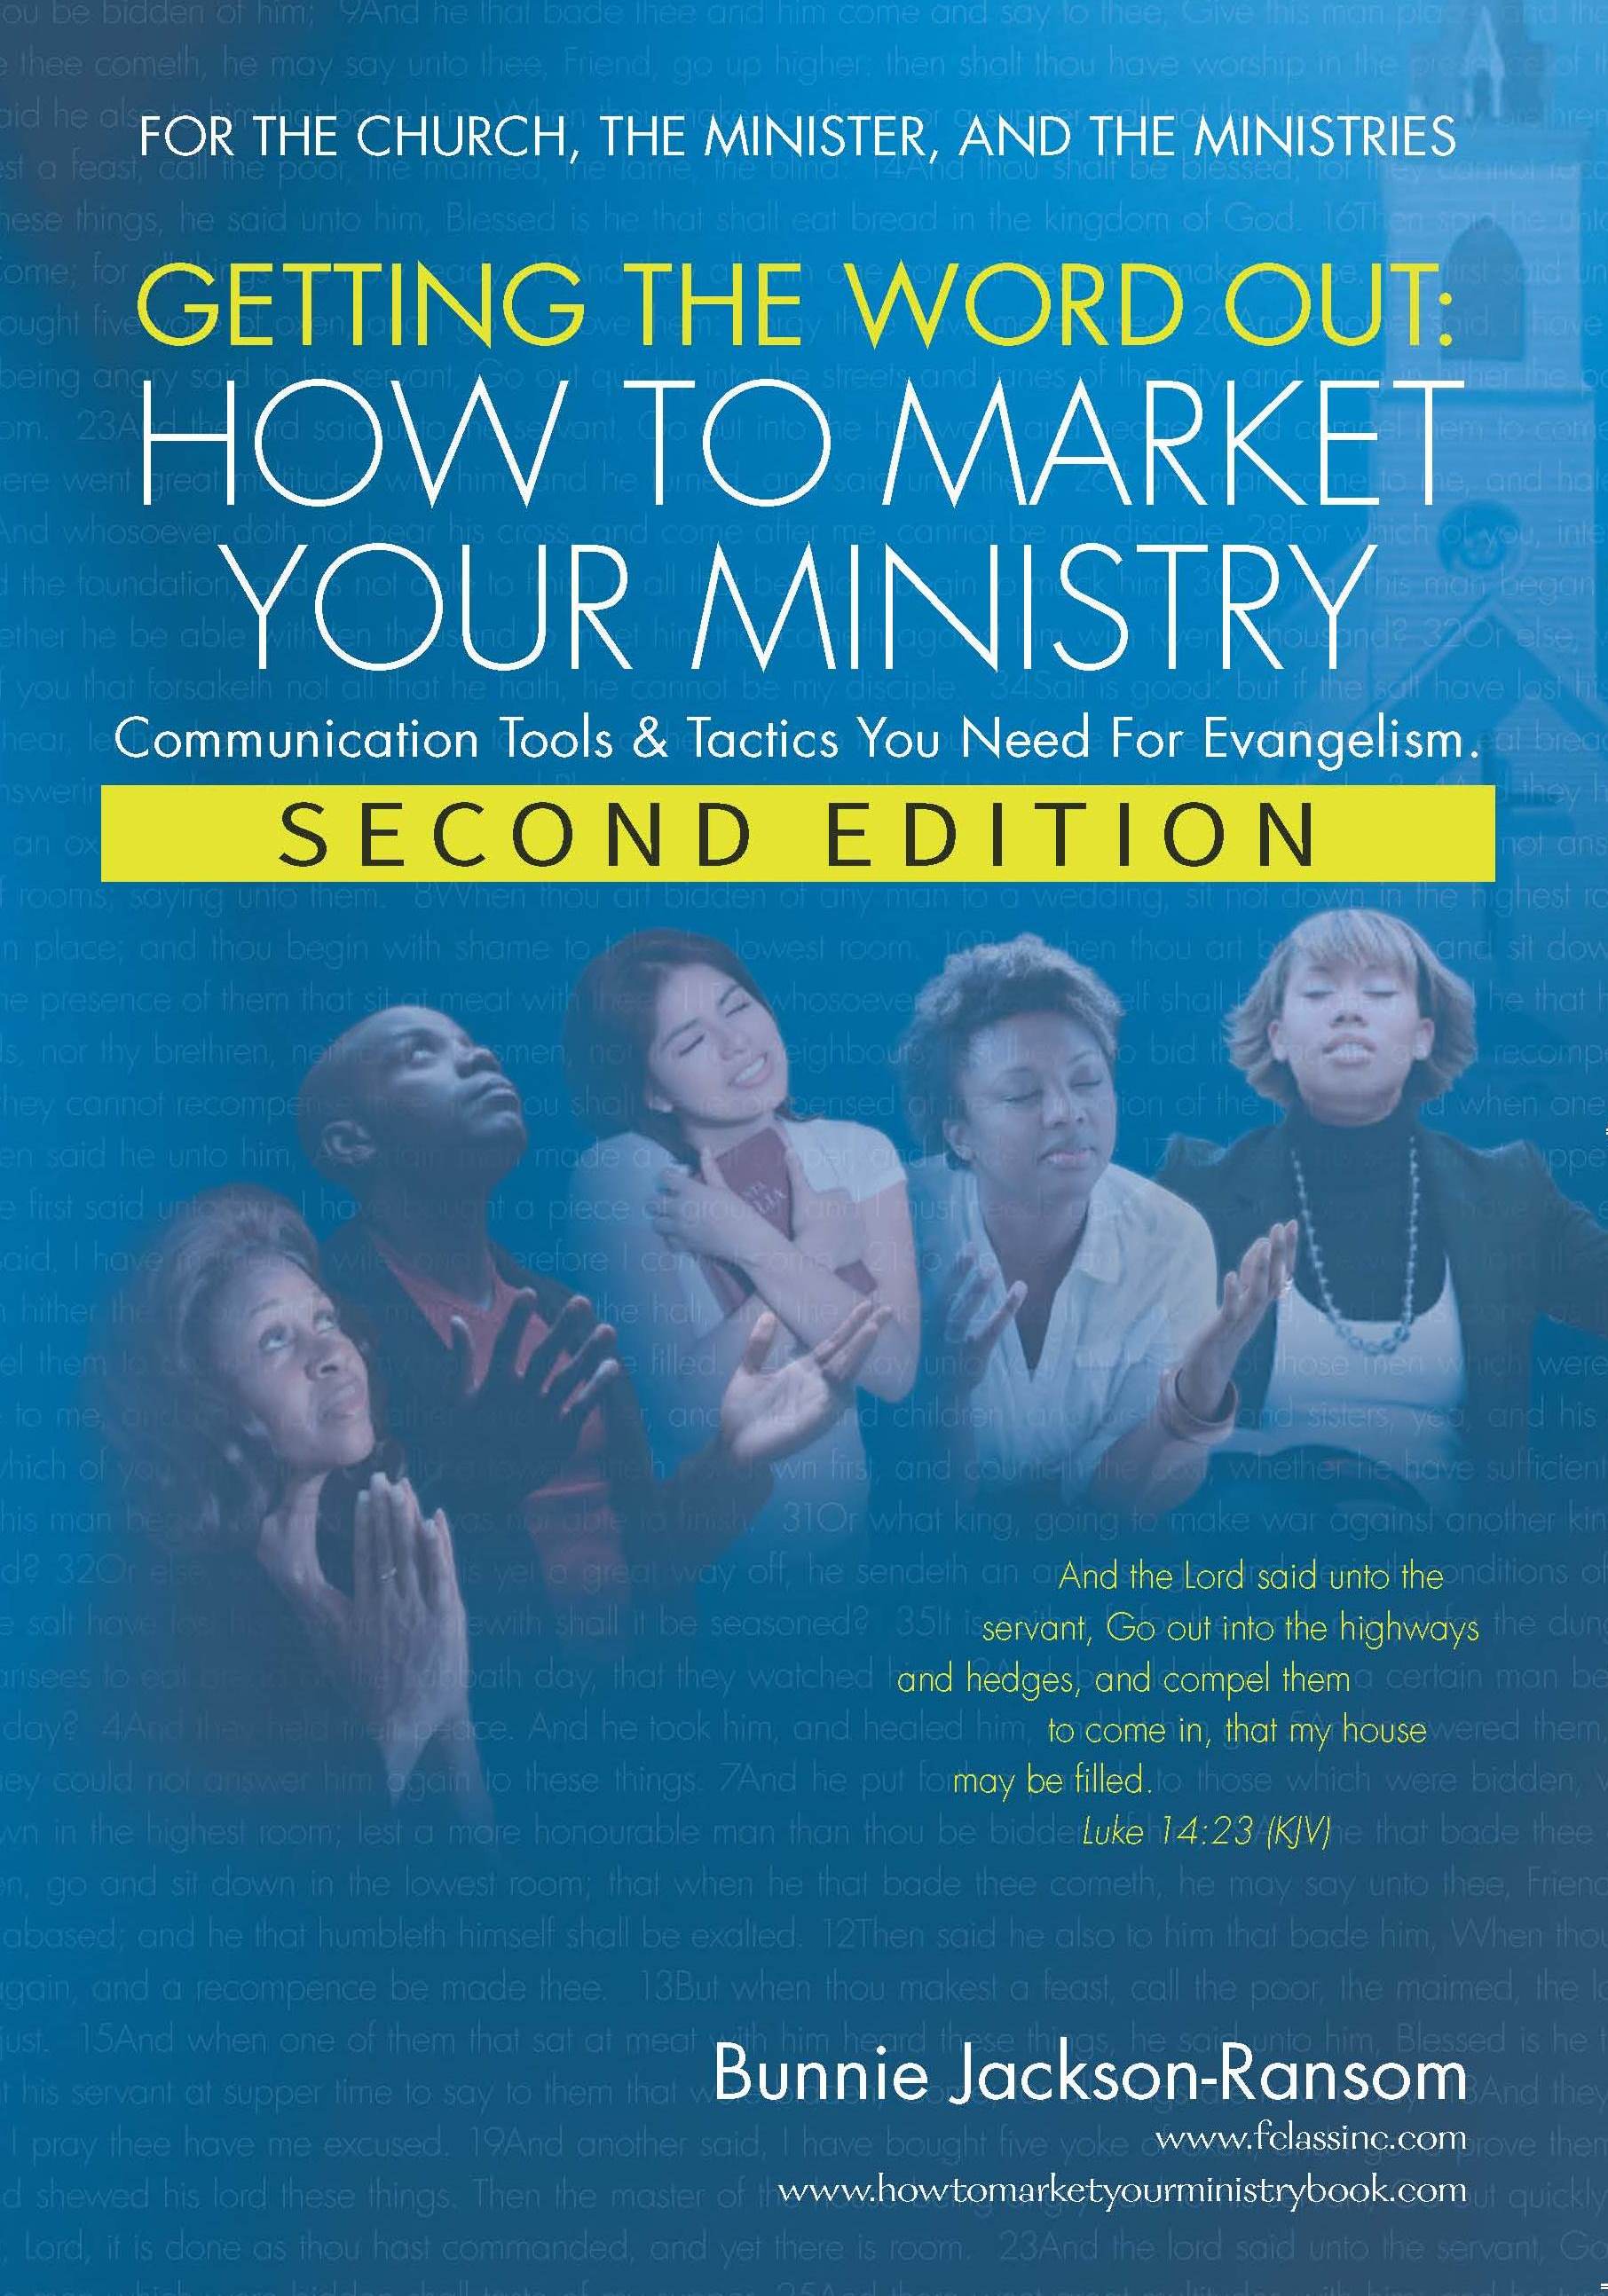 The book -- "Getting The Word Out:  How To Market Your Ministry"